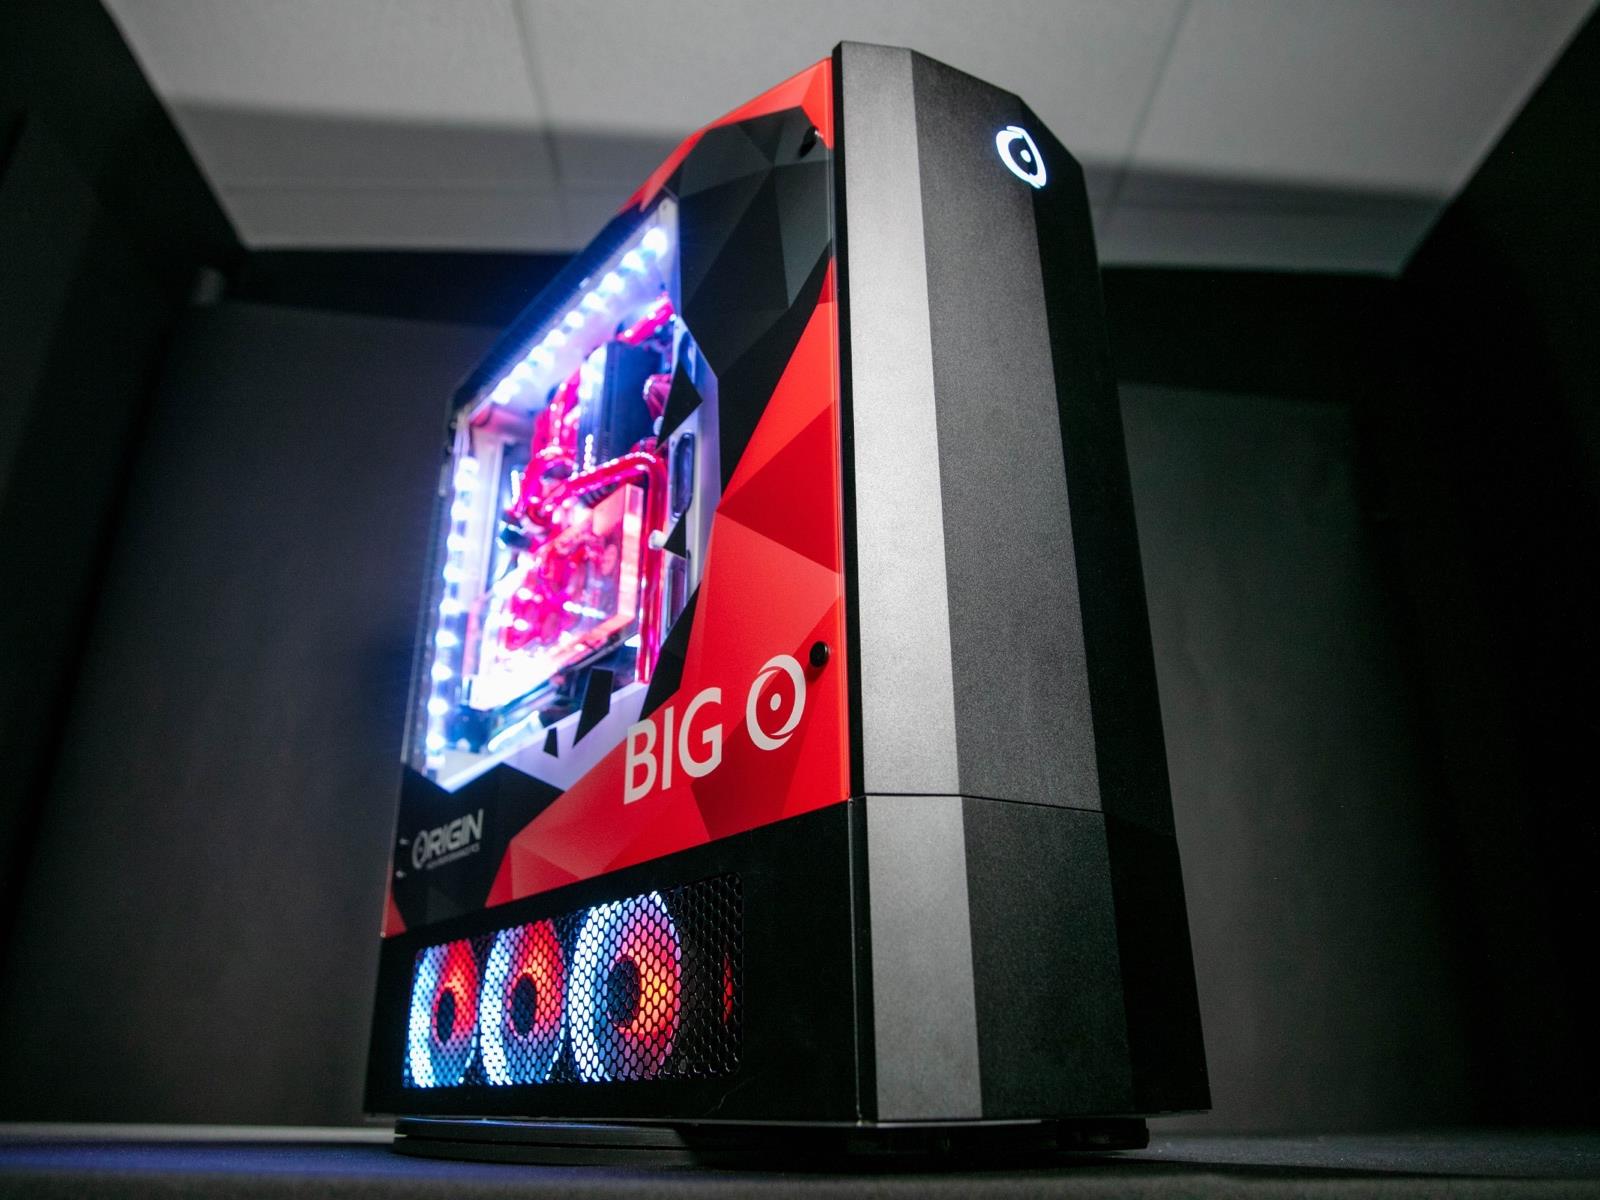 Origin PC Big O Hands-On Review: Play PS4 Games On Your PC